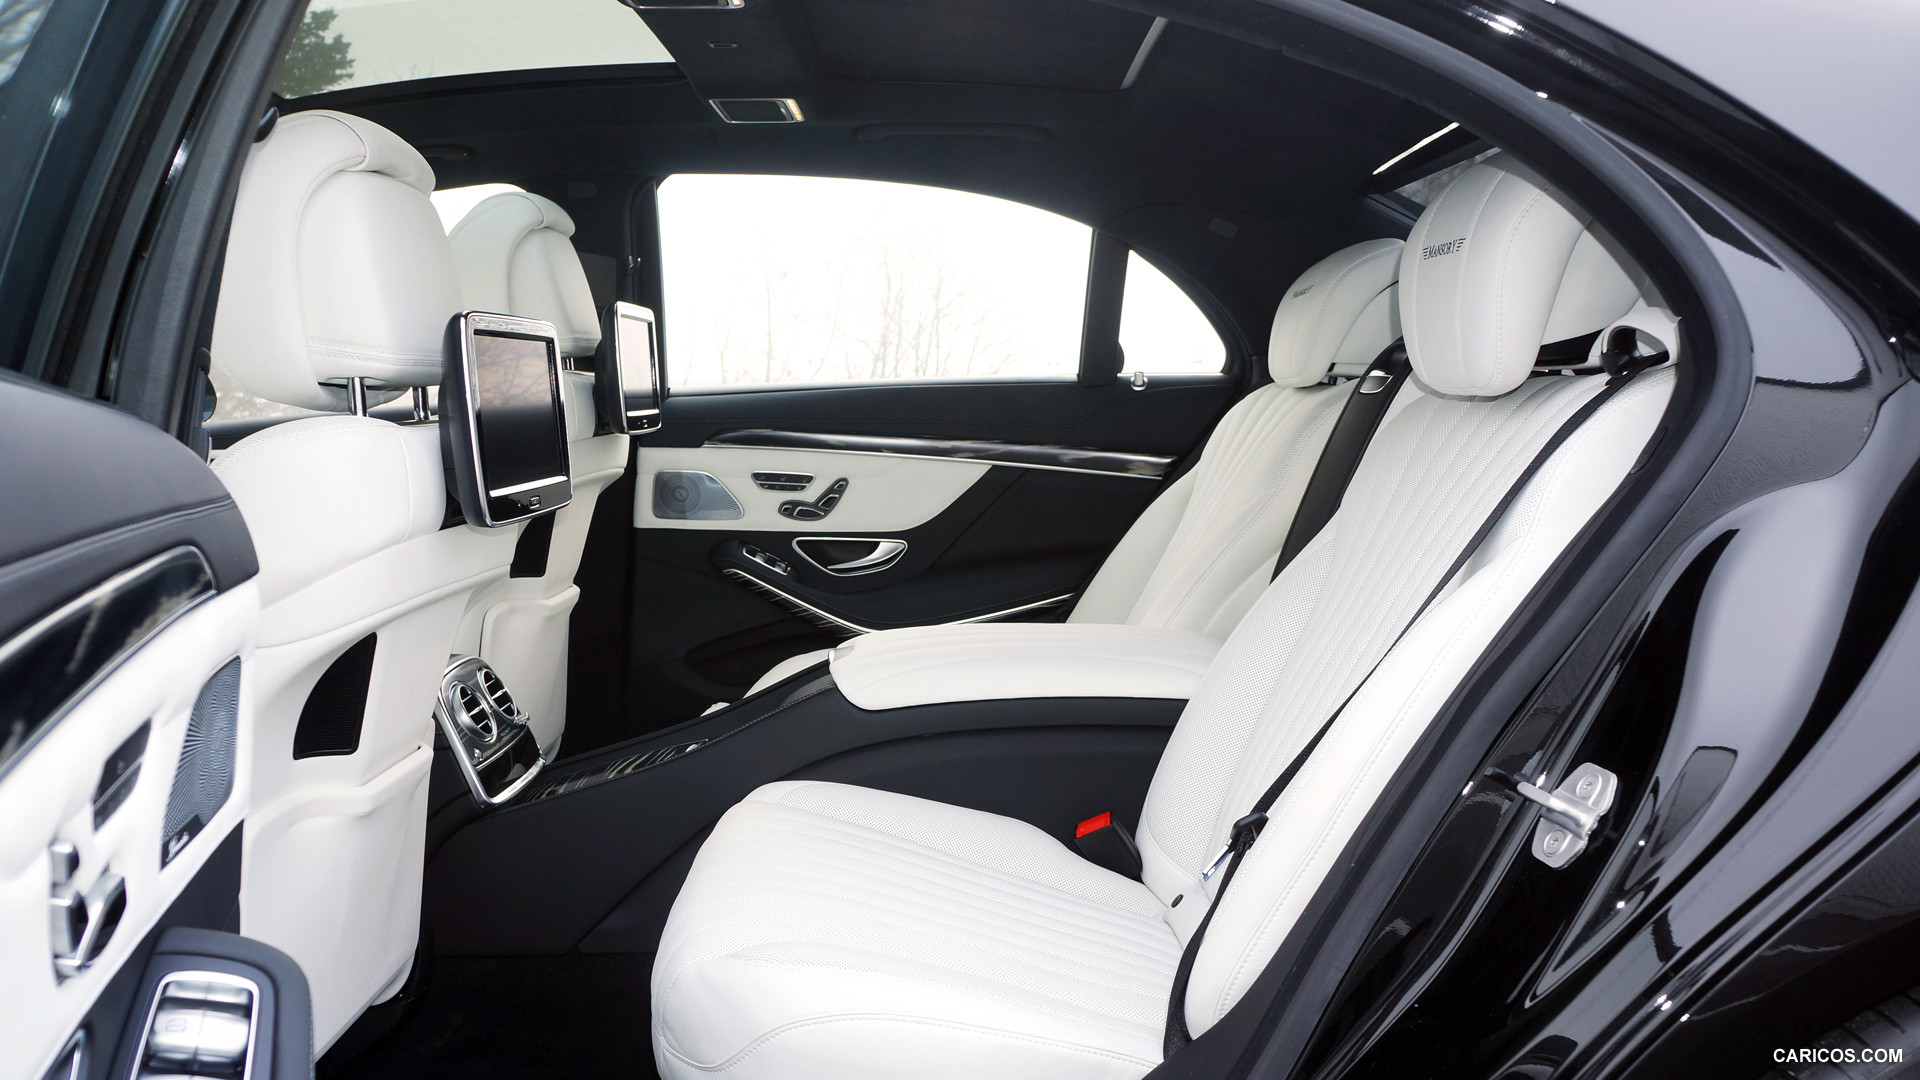 2015 Mansory Mercedes-Benz S63 AMG  - Interior Rear Seats, #15 of 17